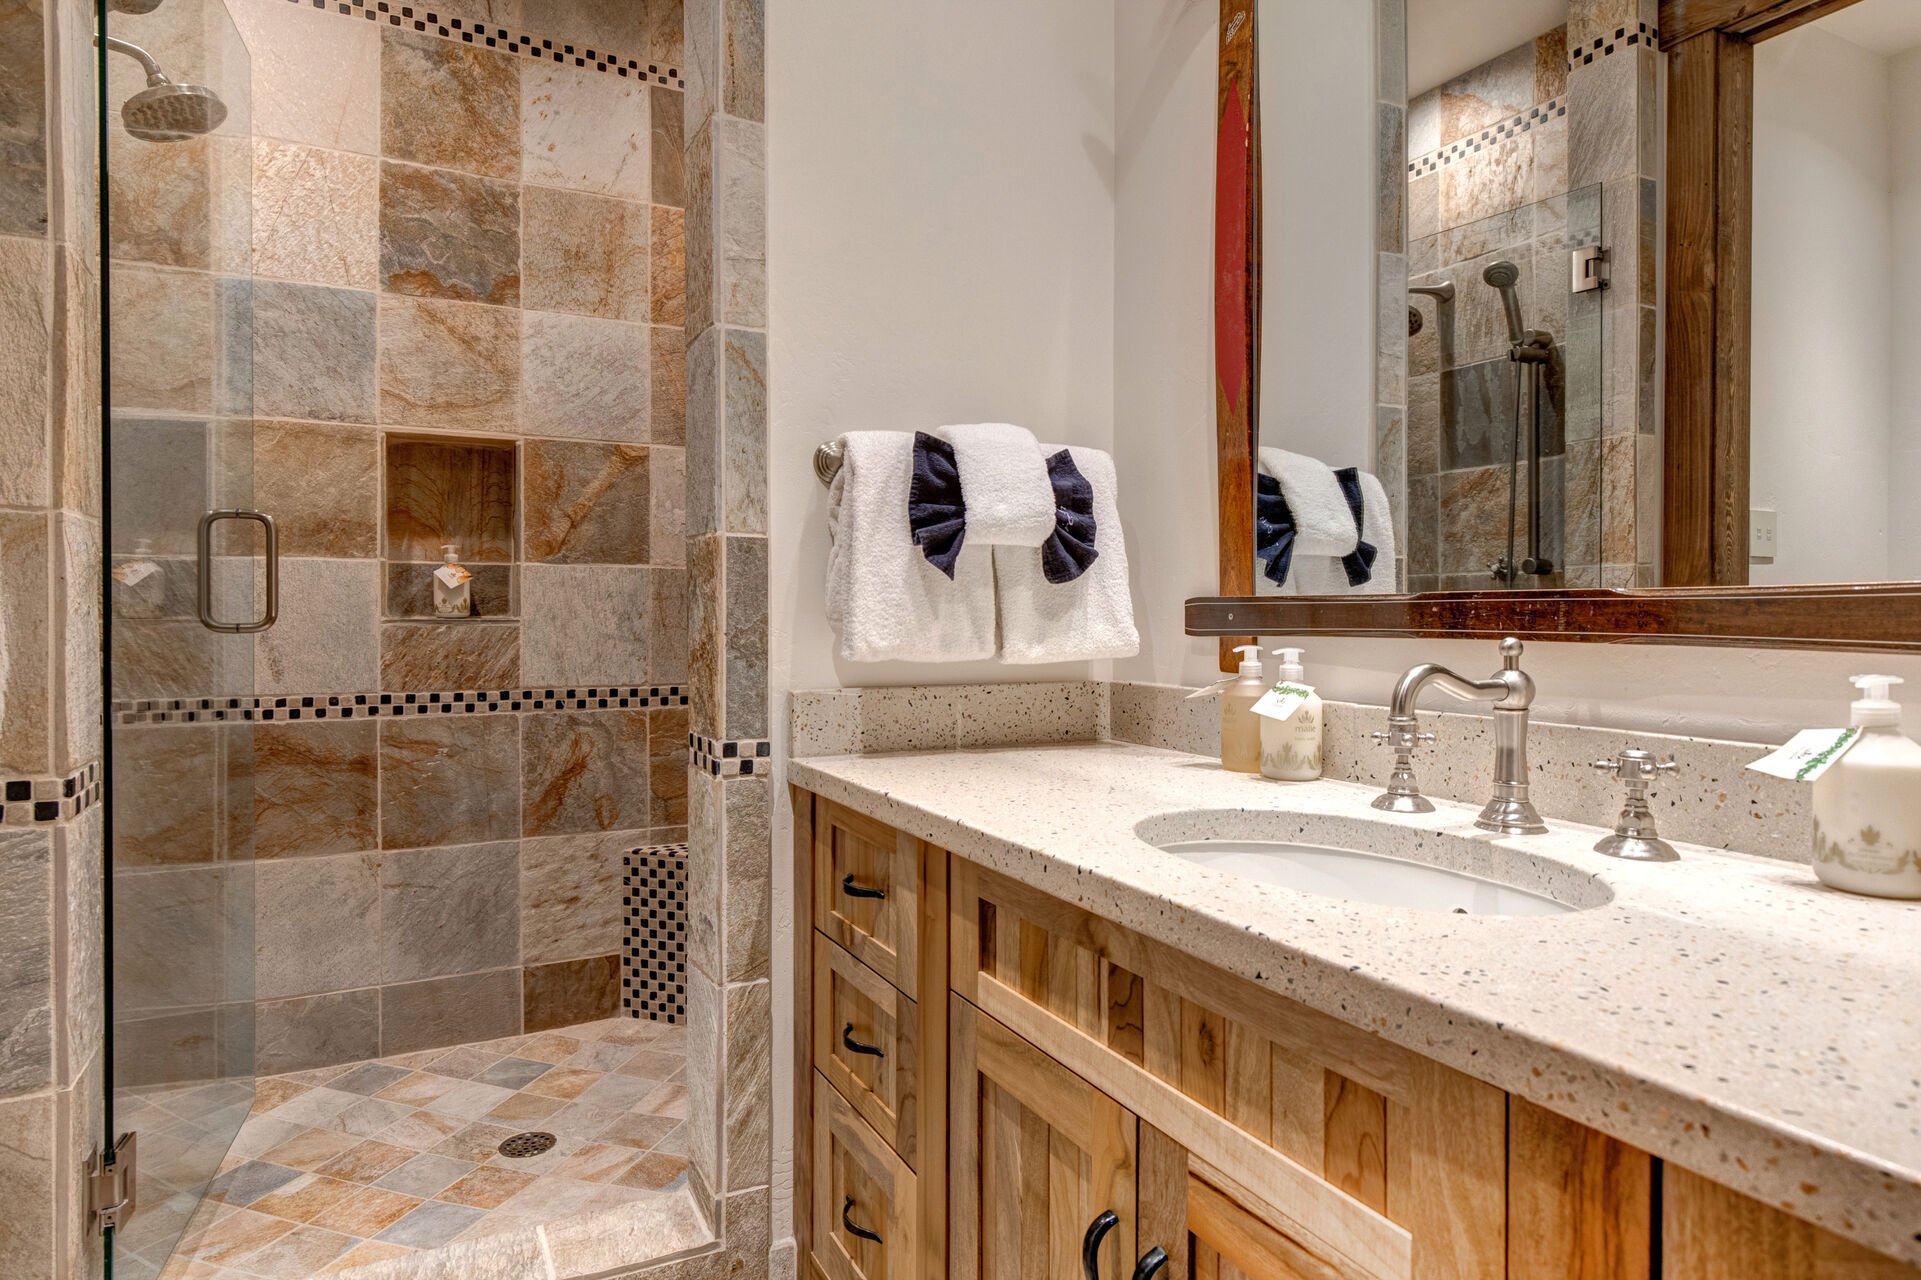 Master Bathroom with soaking tub, glass and tile shower, double vanities and private balcony